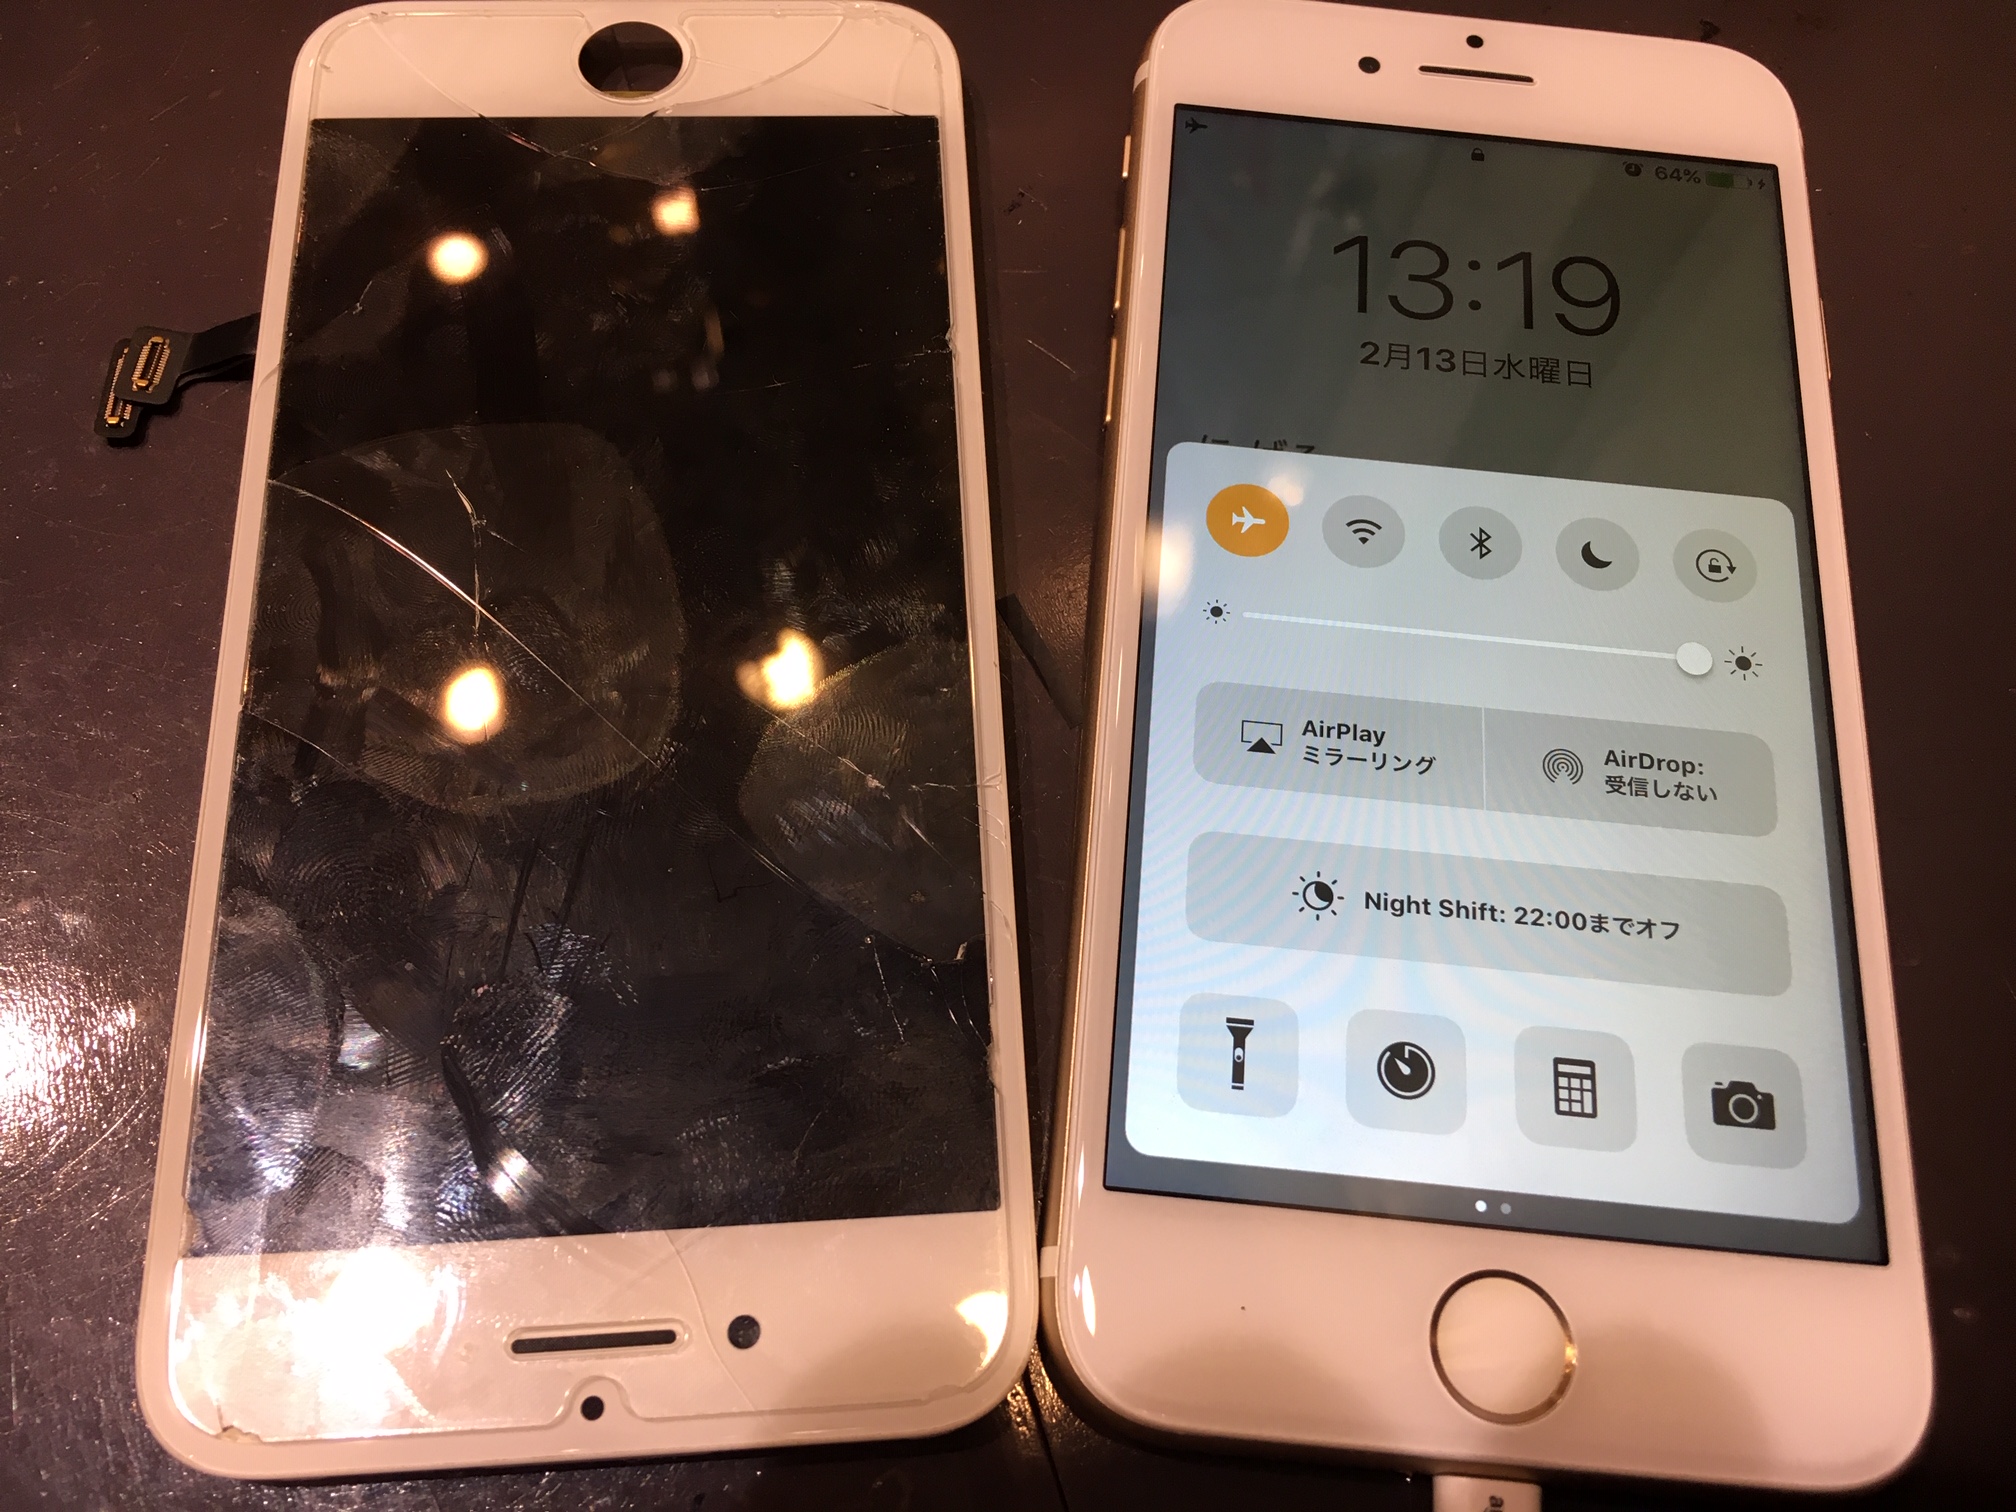 iphone7　画面とバッテリー交換　尼崎・伊丹のiPhone即日修理ならスマートクール